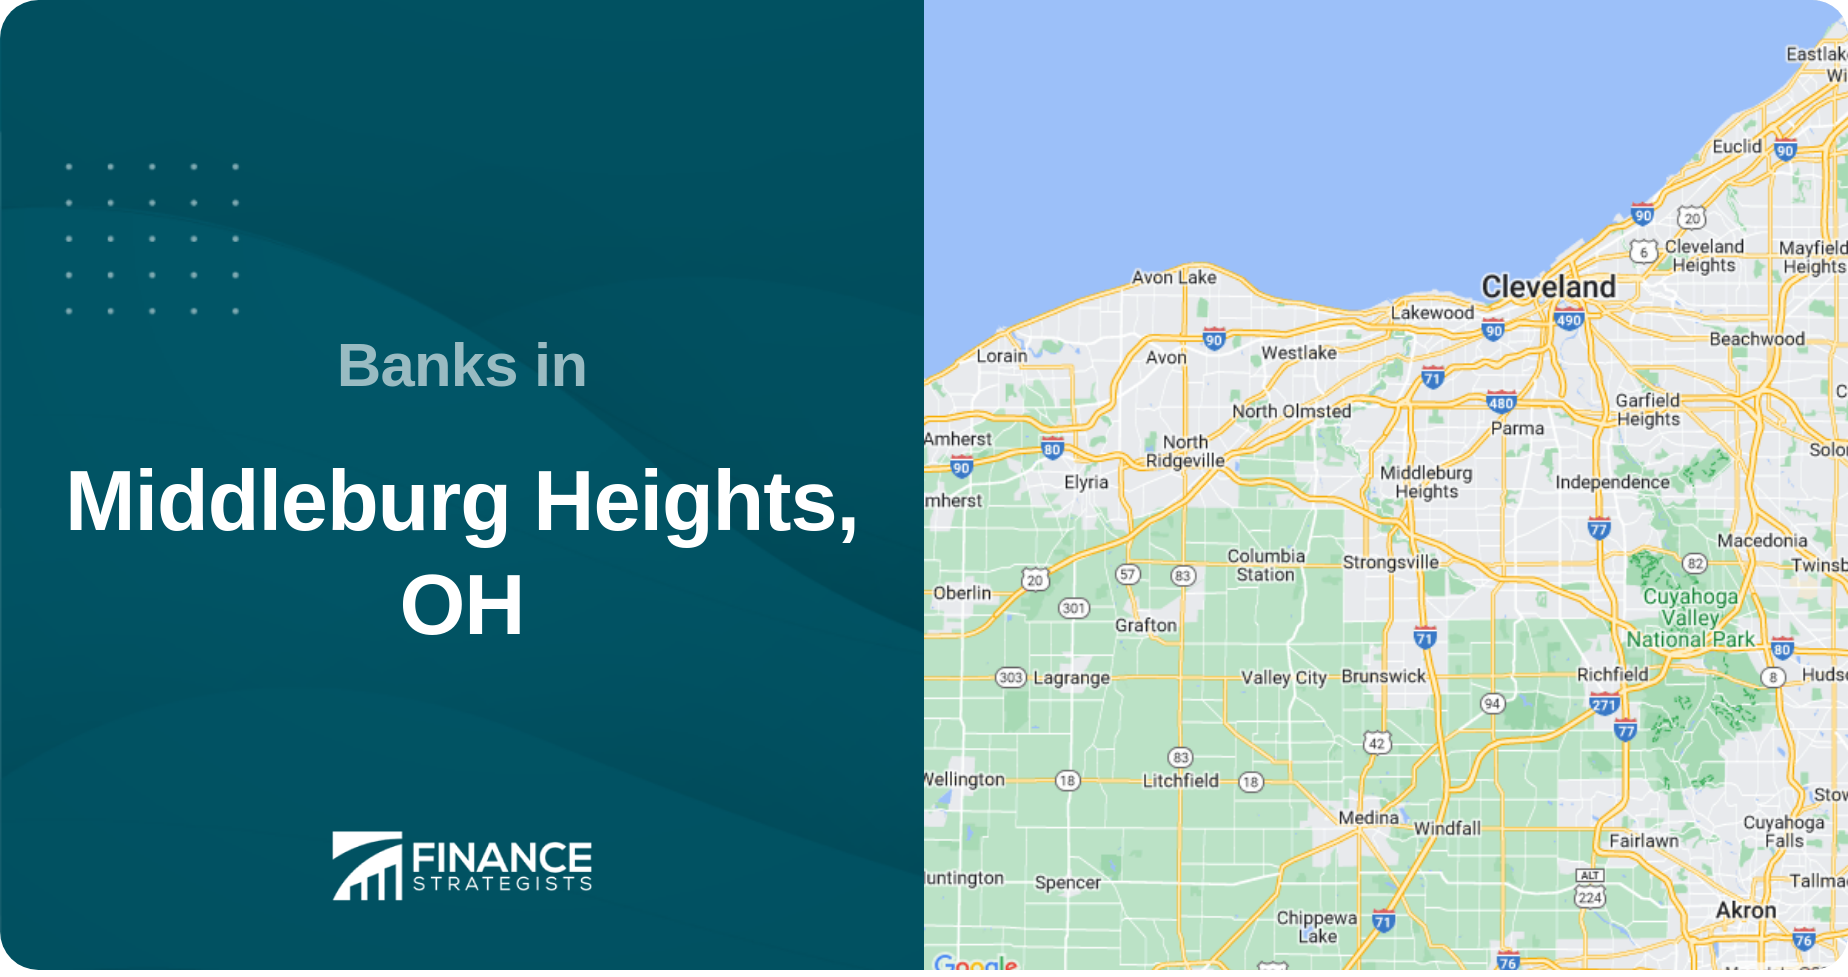 Banks in Middleburg Heights, OH